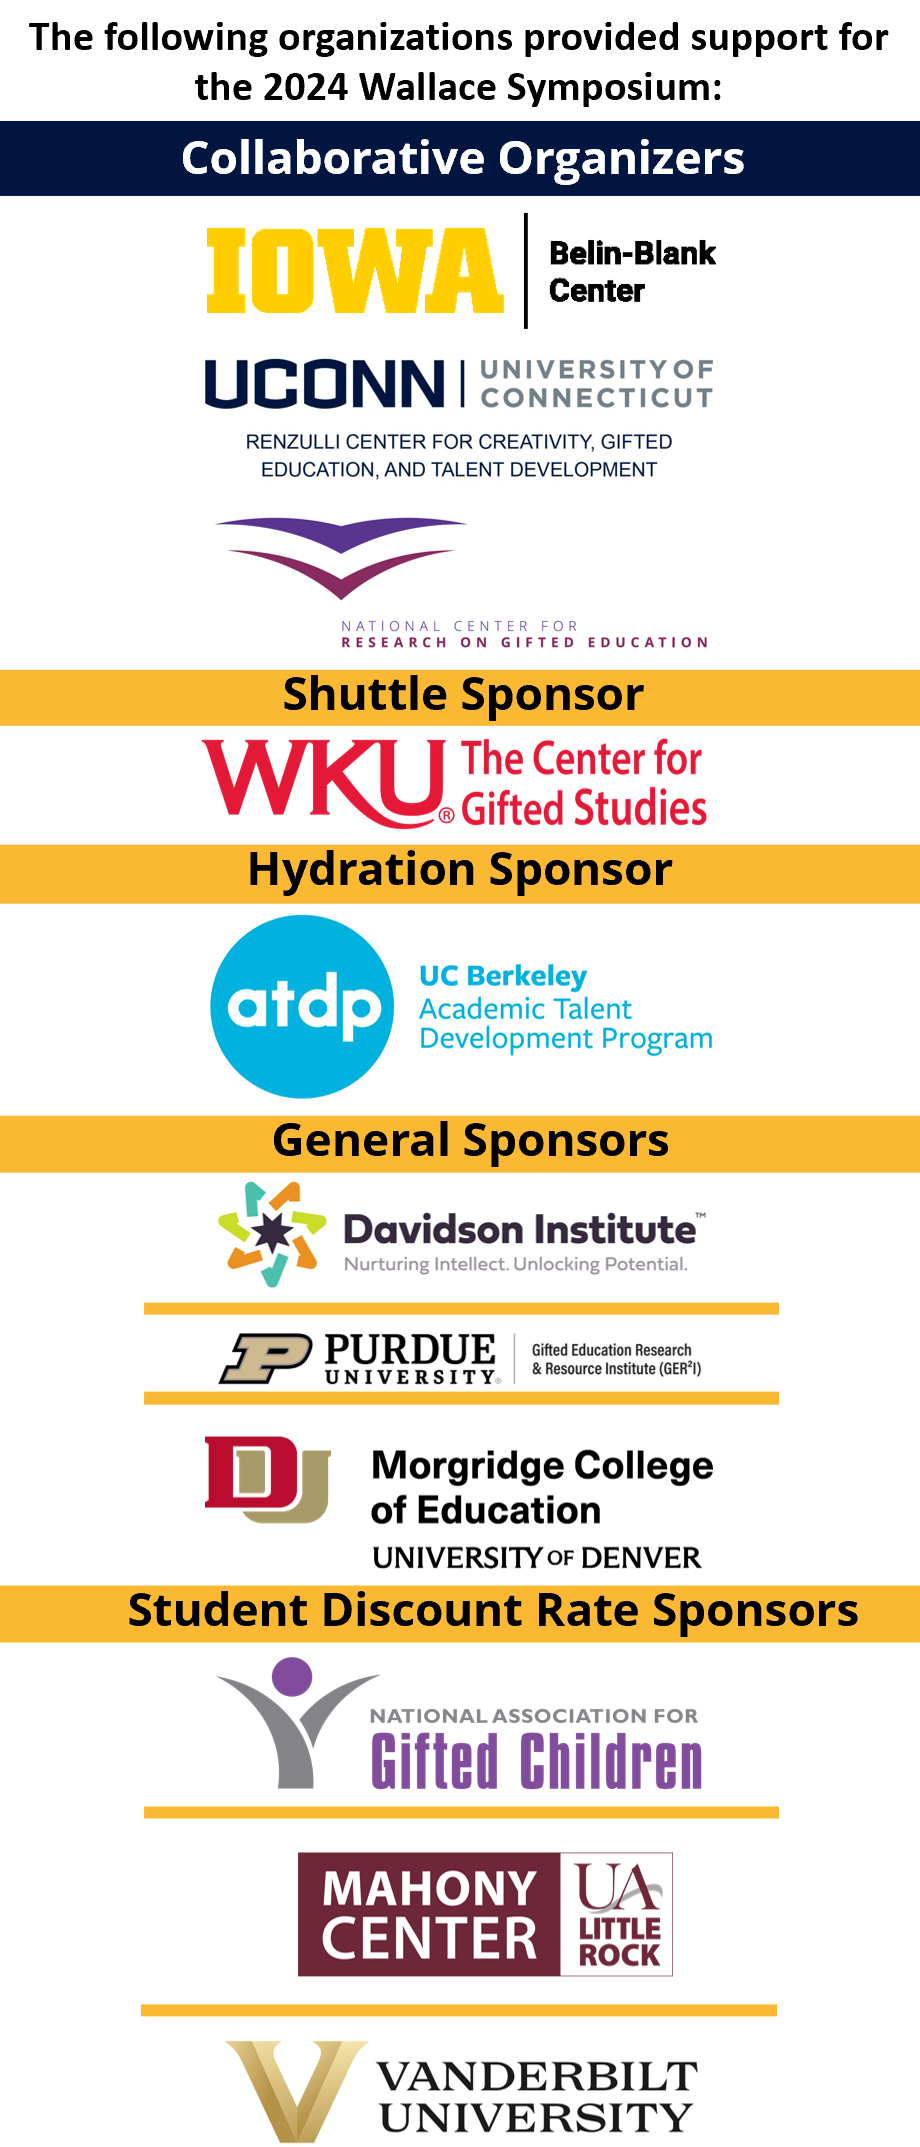 List of Wallace Symposium sponsors